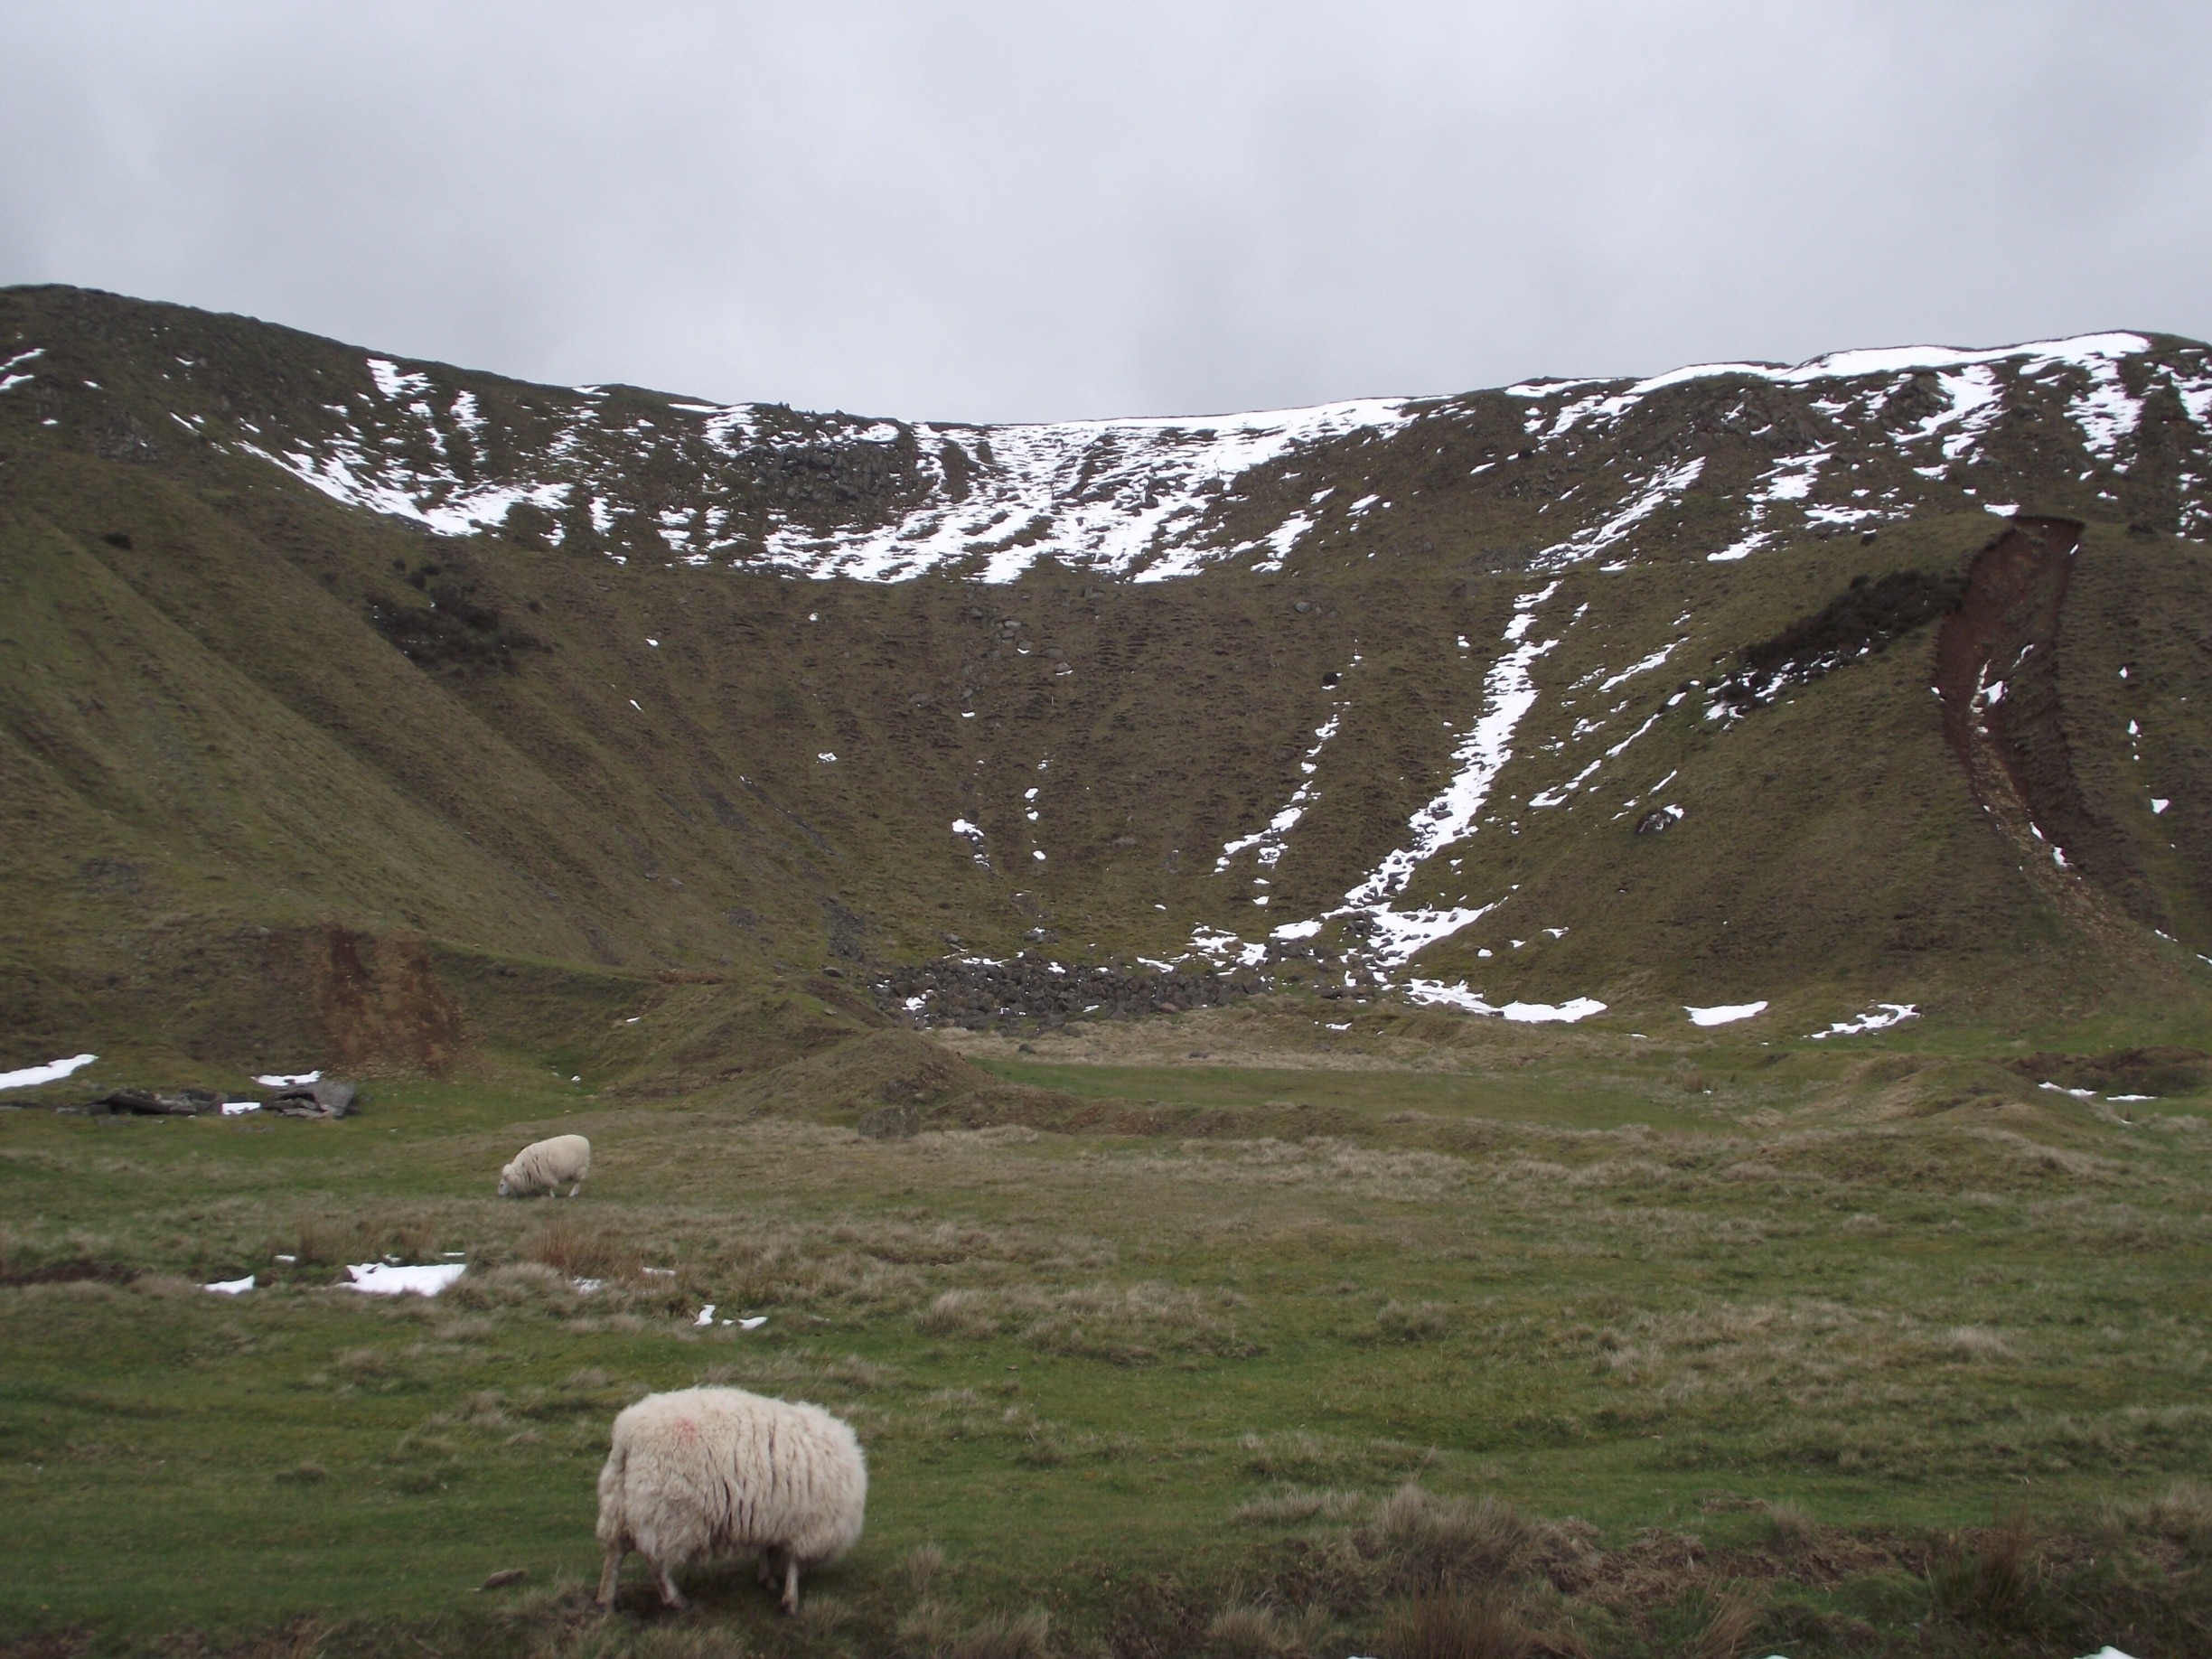 Snow capped hills, icy weather...but the sheep seem happy enough!